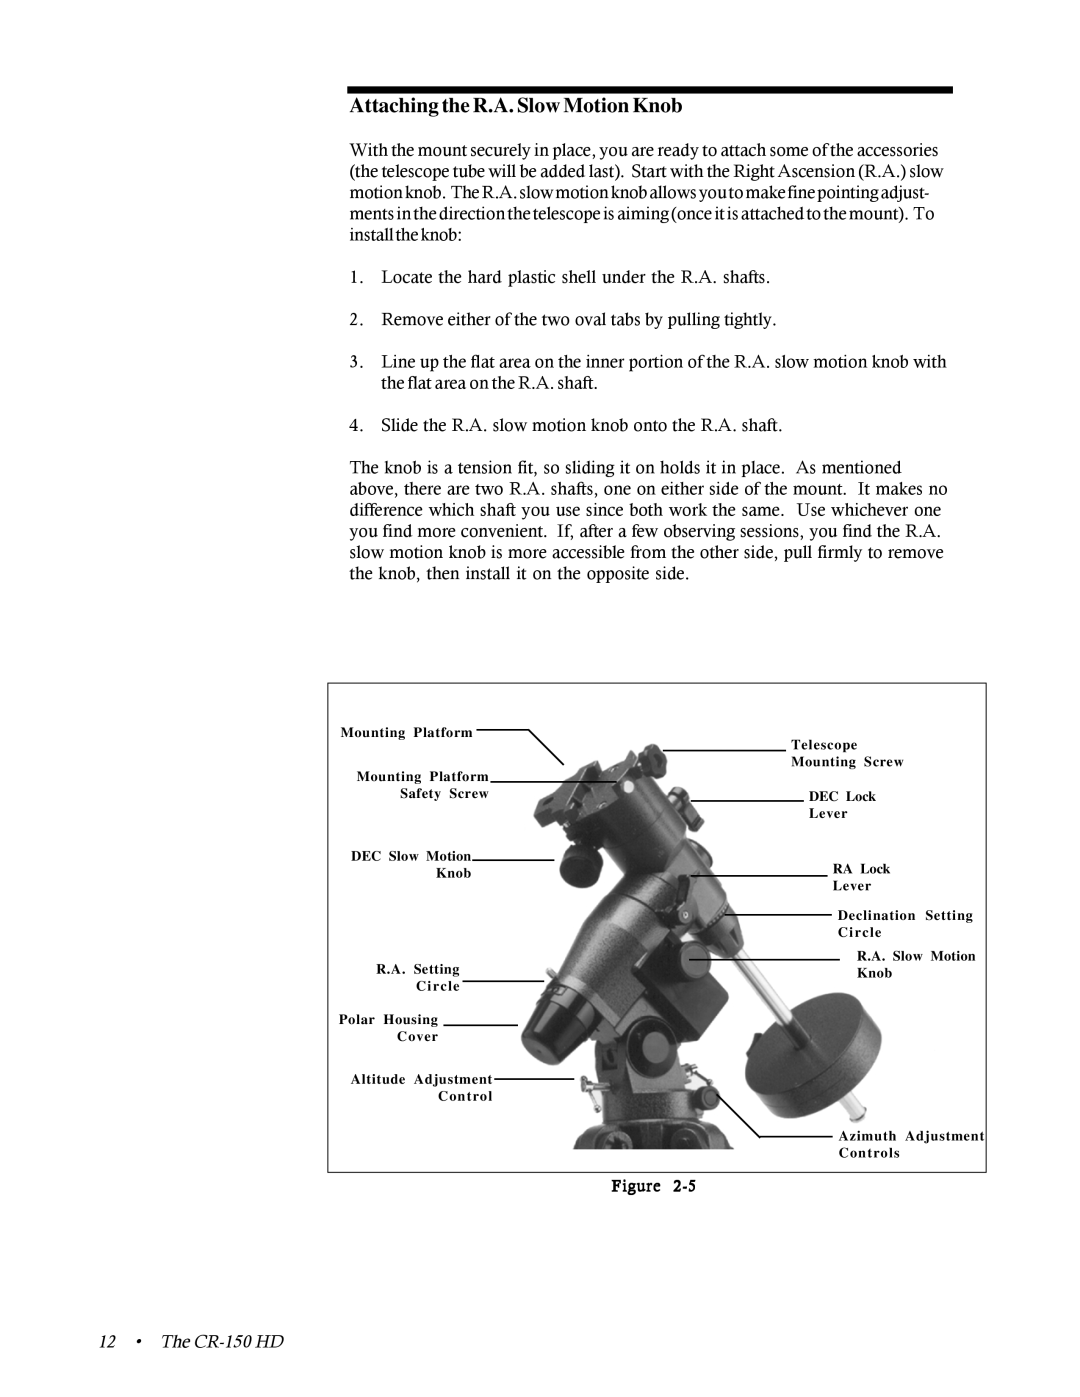 Celestron CR-150 HD instruction manual Attaching the R.A. Slow Motion Knob, The CR-150HD 